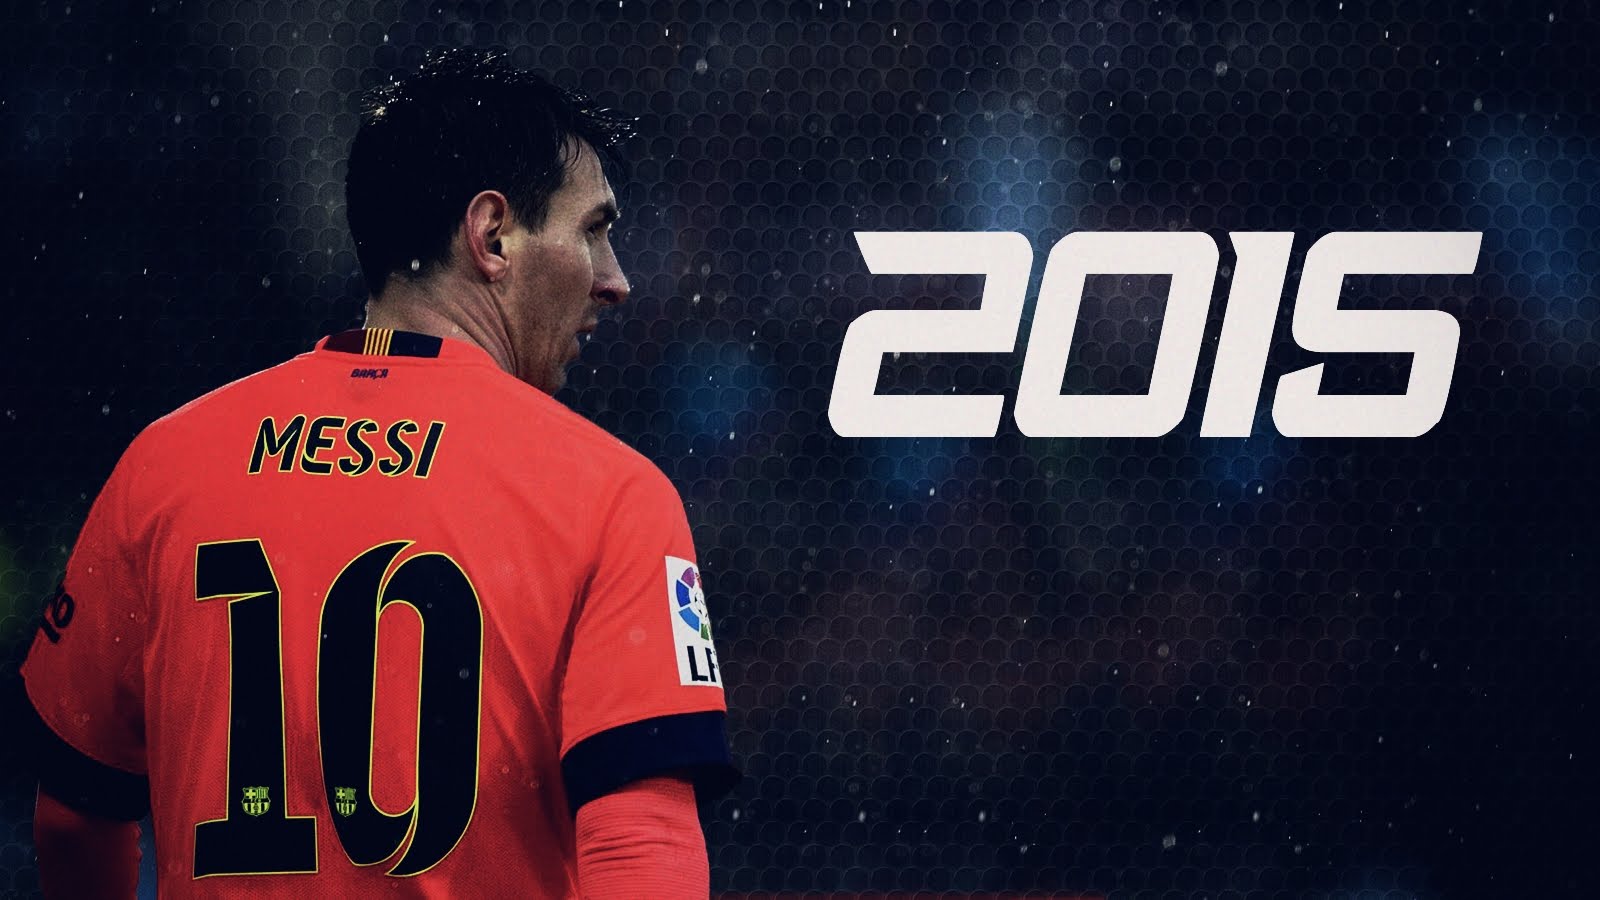 Messi Wallpaper 2015 Hd For Pc 3